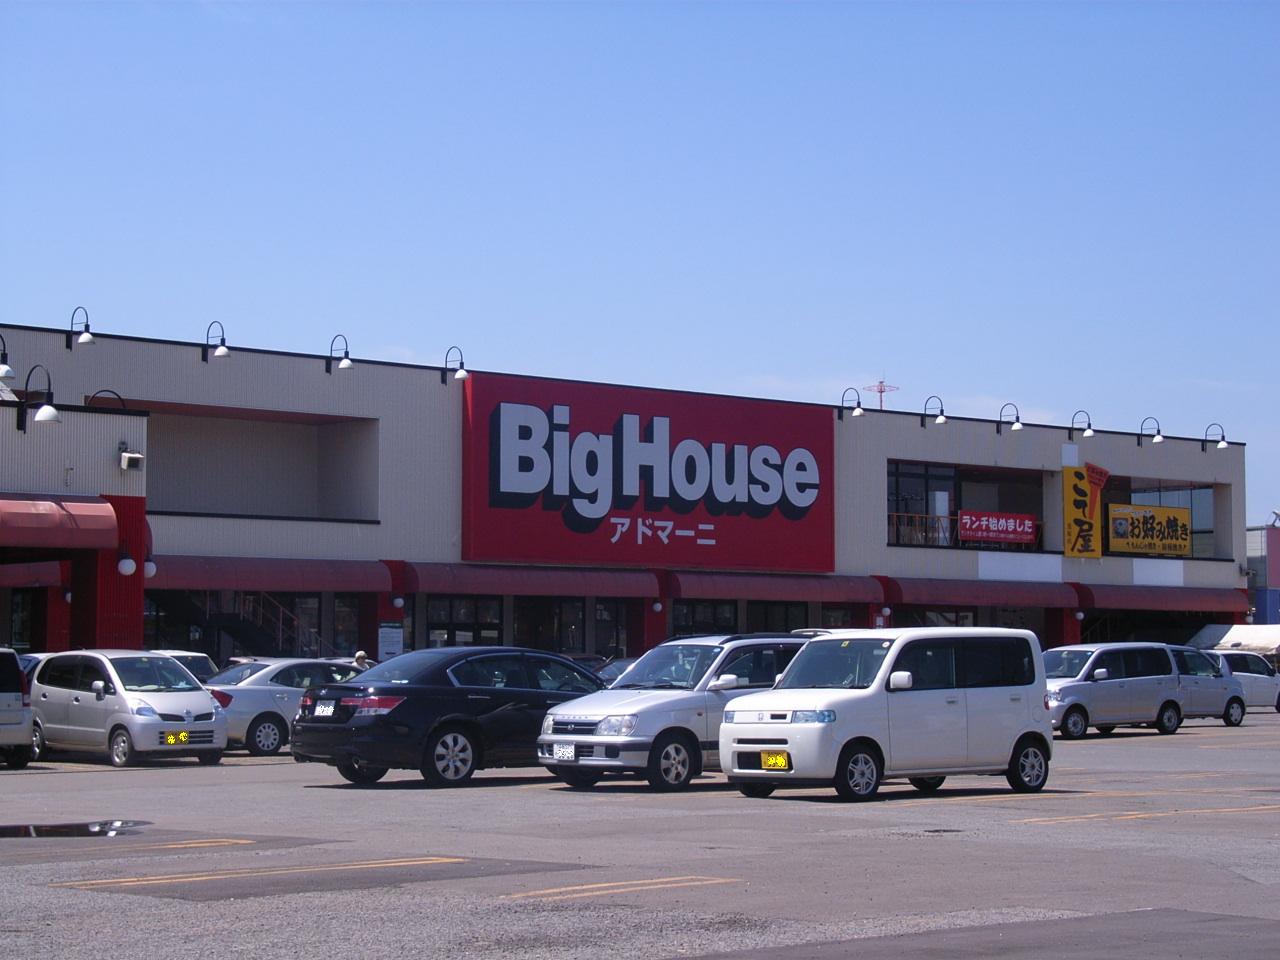 Supermarket. Big House A ・ Domani Mihara store up to (super) 578m